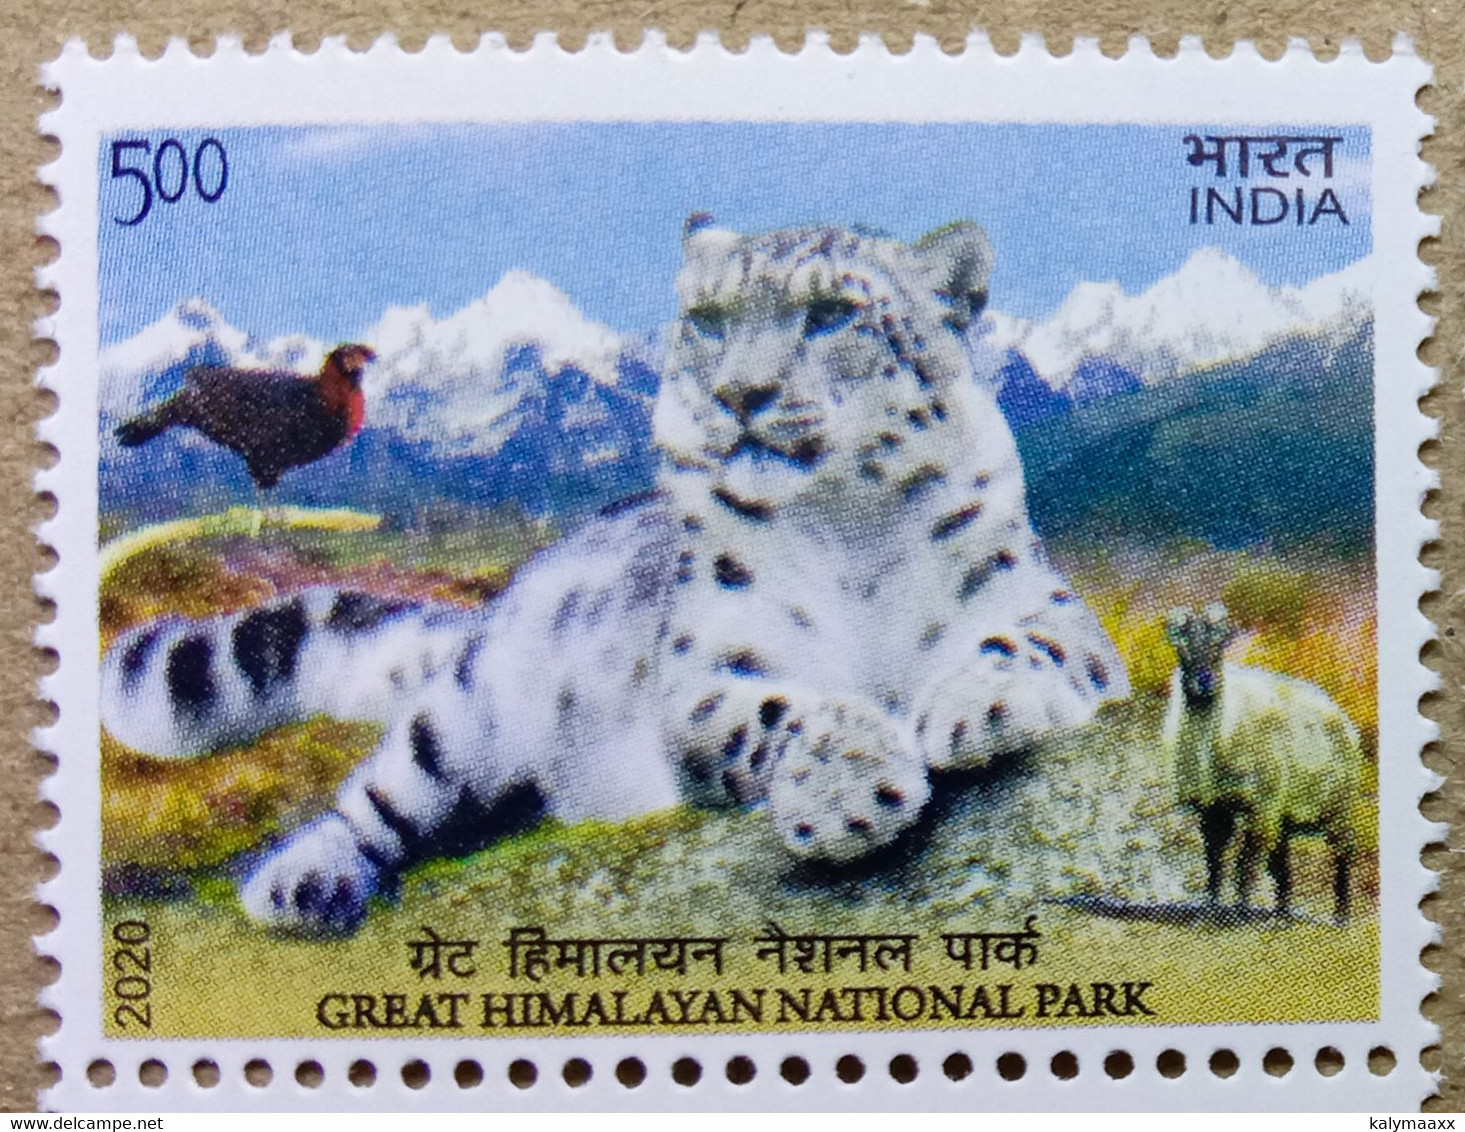 INDIA 2020 UNESCO GREAT HIMALAYAN NATIONAL PARK, SNOW LEOPARD, WHITE TIGER, WILD LIFE.....MNH - Unused Stamps